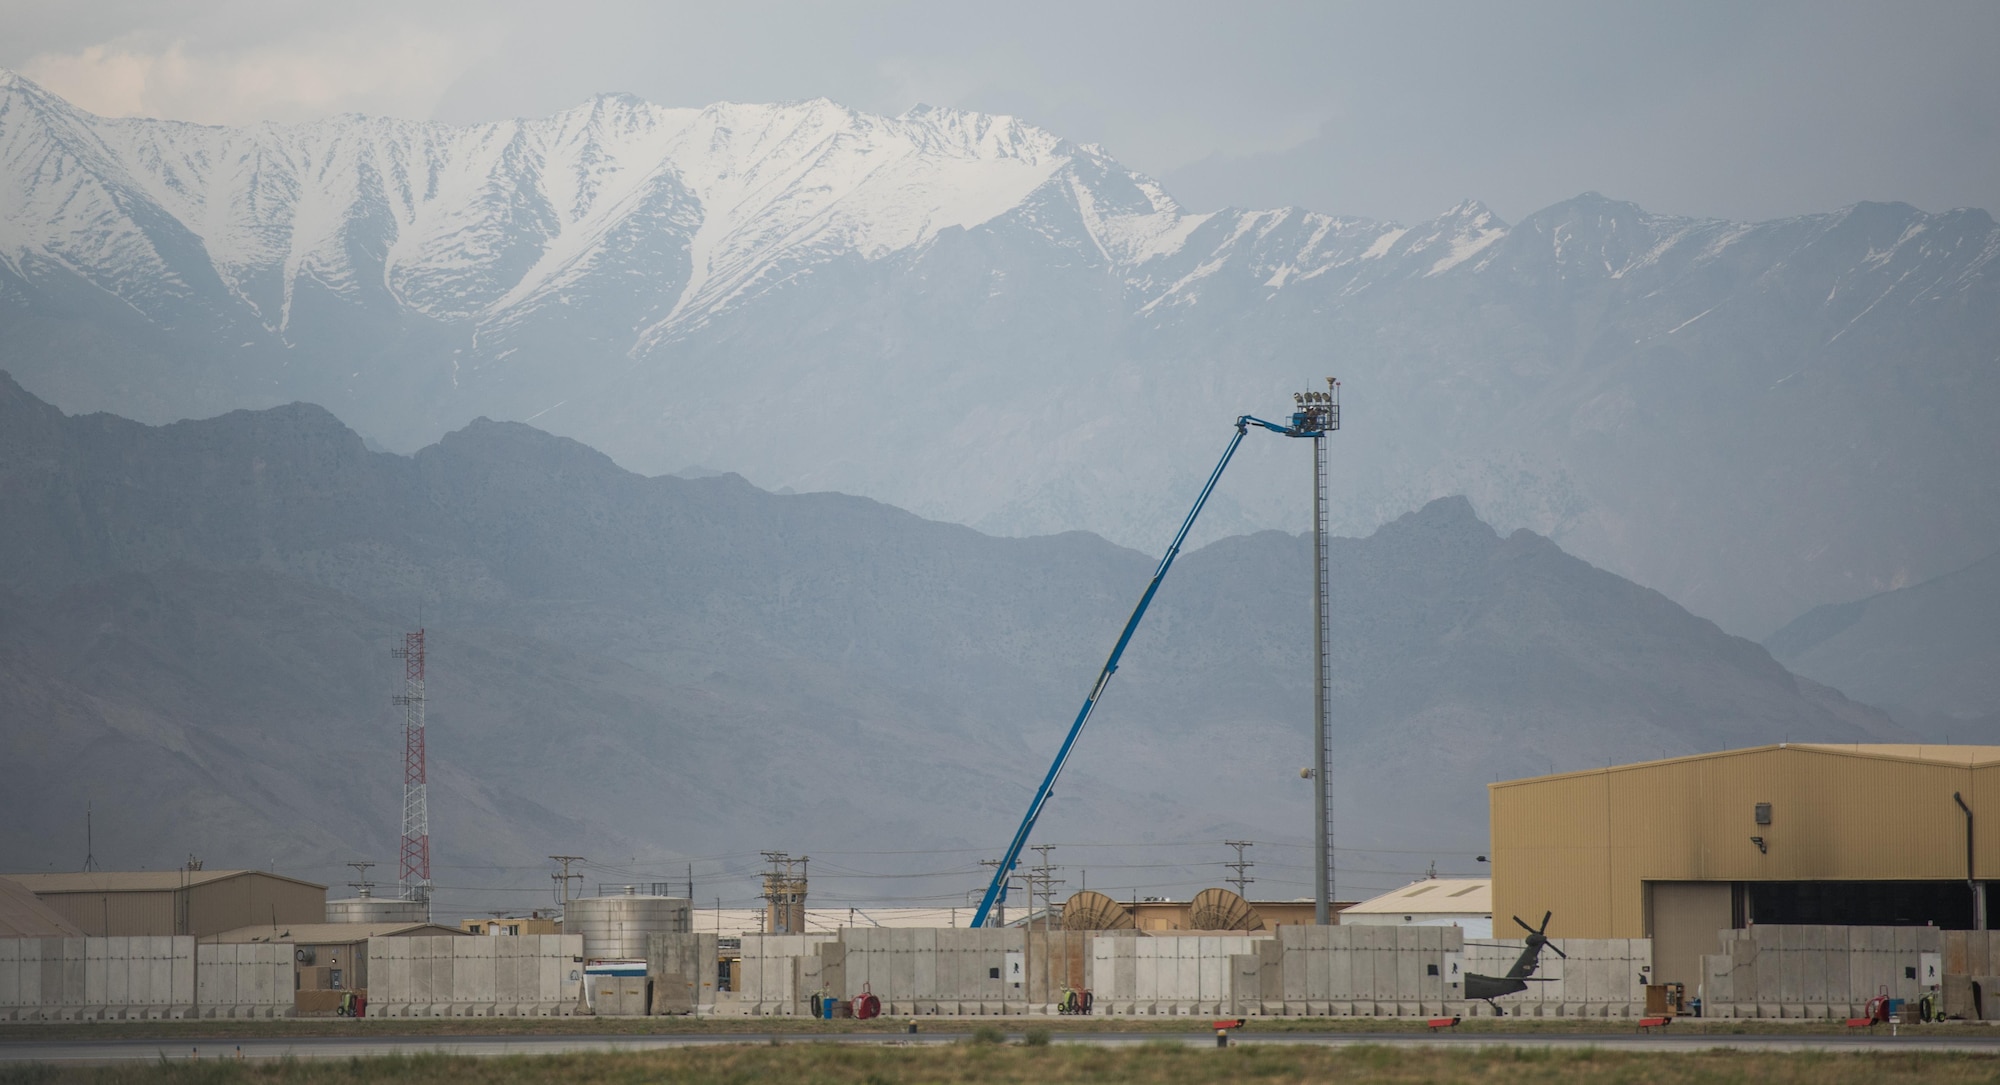 Airmen from the 455th Expeditionary Civil Engineer Squadron replace airfield lights at Bagram Airfield, Afghanistan, May 12, 2017. In order to prevent accidents on the airfield, the lights were replaced to help personnel driving vehicles see at night and reduce accidents during hours of darkness. (U.S. Air Force photo by Staff Sgt. Benjamin Gonsier)